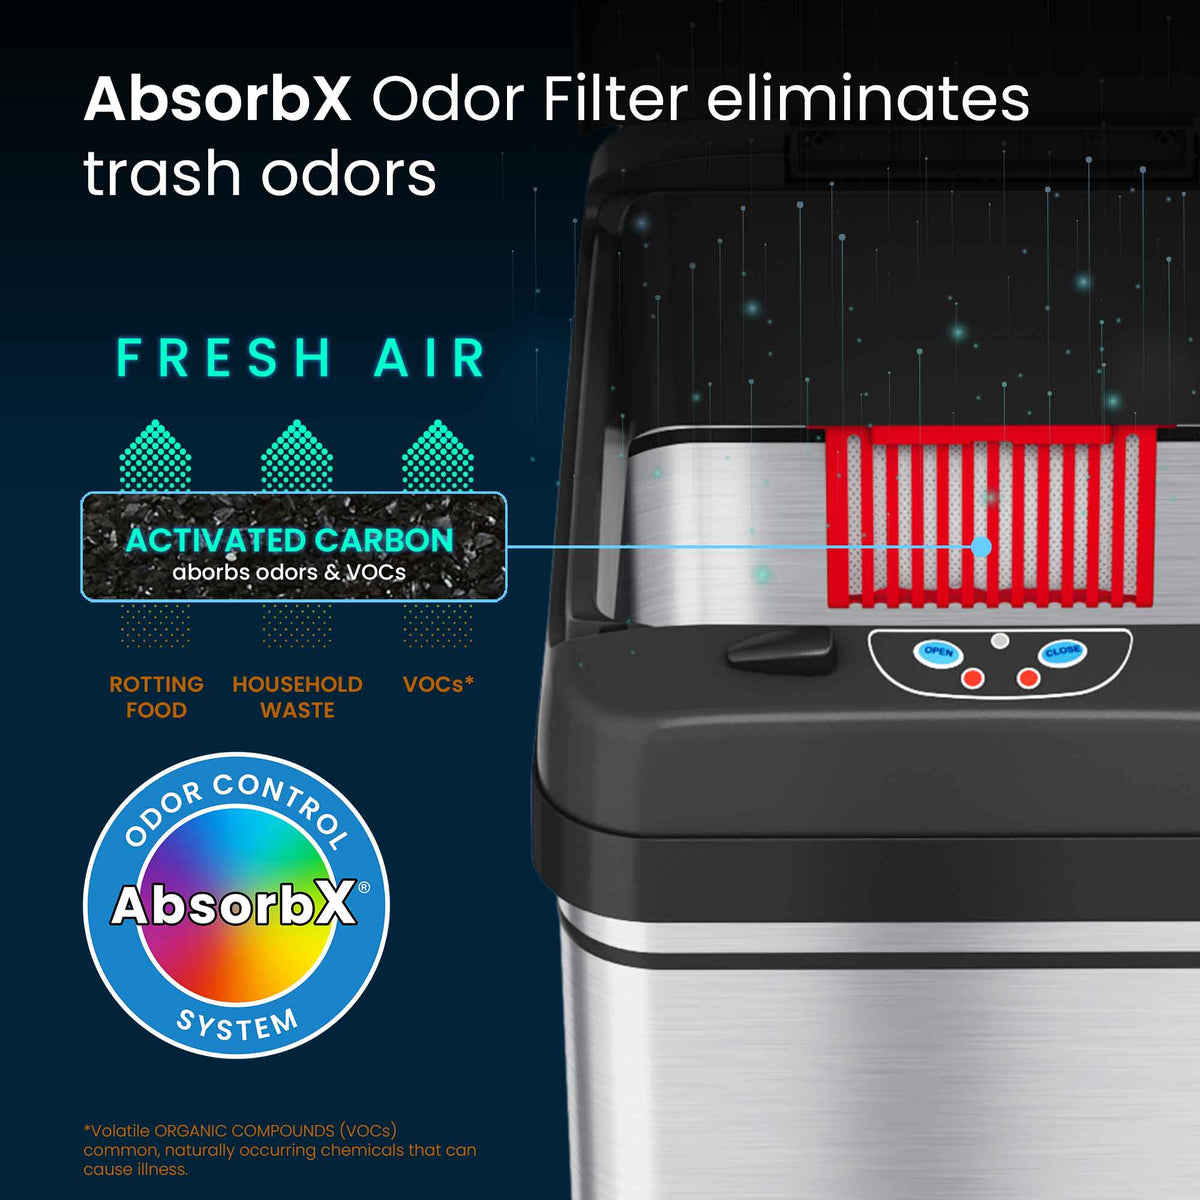 iTouchless Touchless Sensor Kitchen Trash Can and Bathroom Trash Can Combo Pack AbsorbX Odor Filter eliminates trash odors